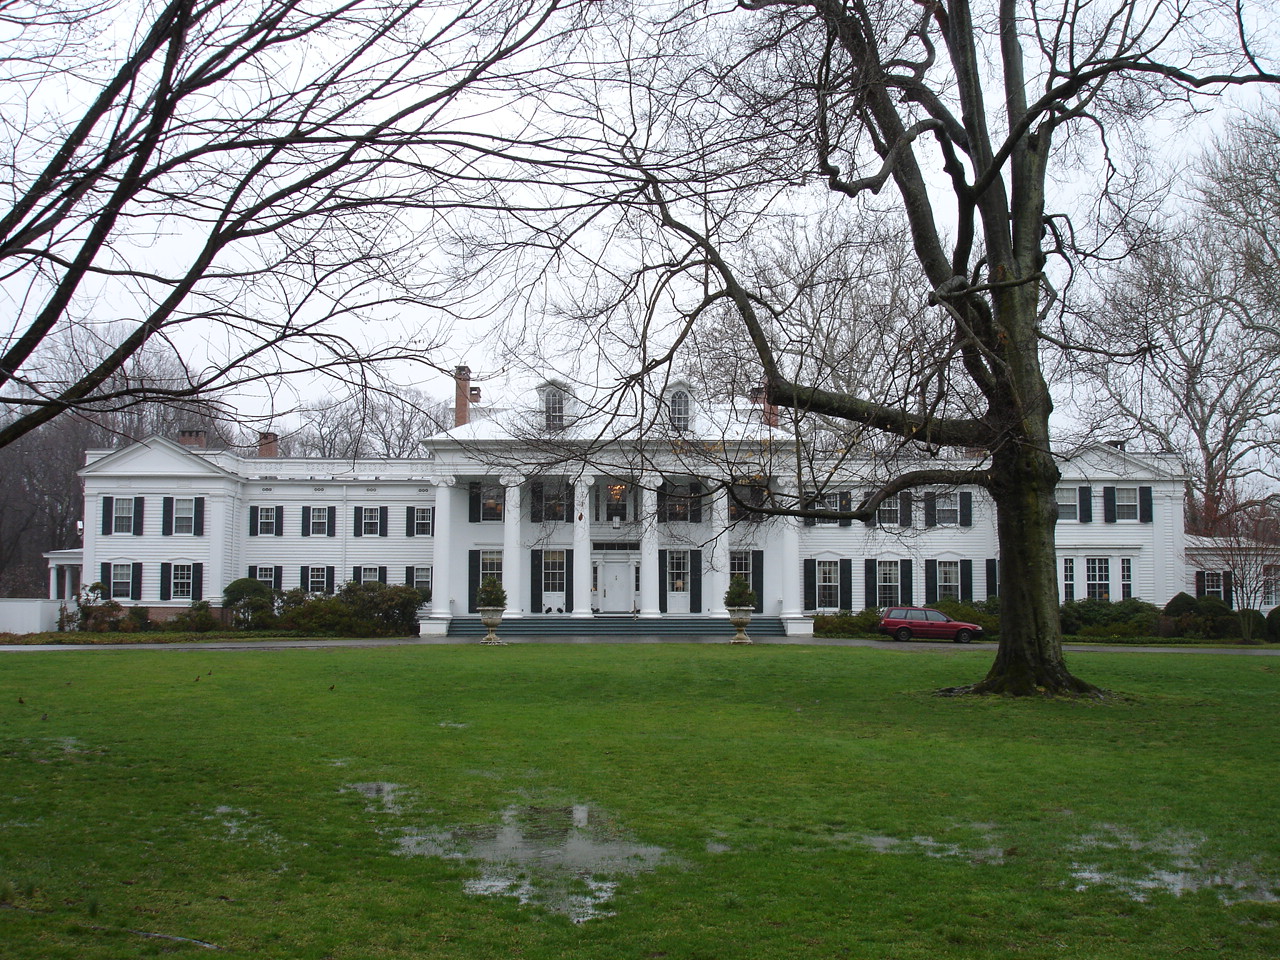 Drumthwacket was built in 1835 by Charles Smith Olden and later expanded in 1893. It has been the official New Jersey governor's residence since 1982.